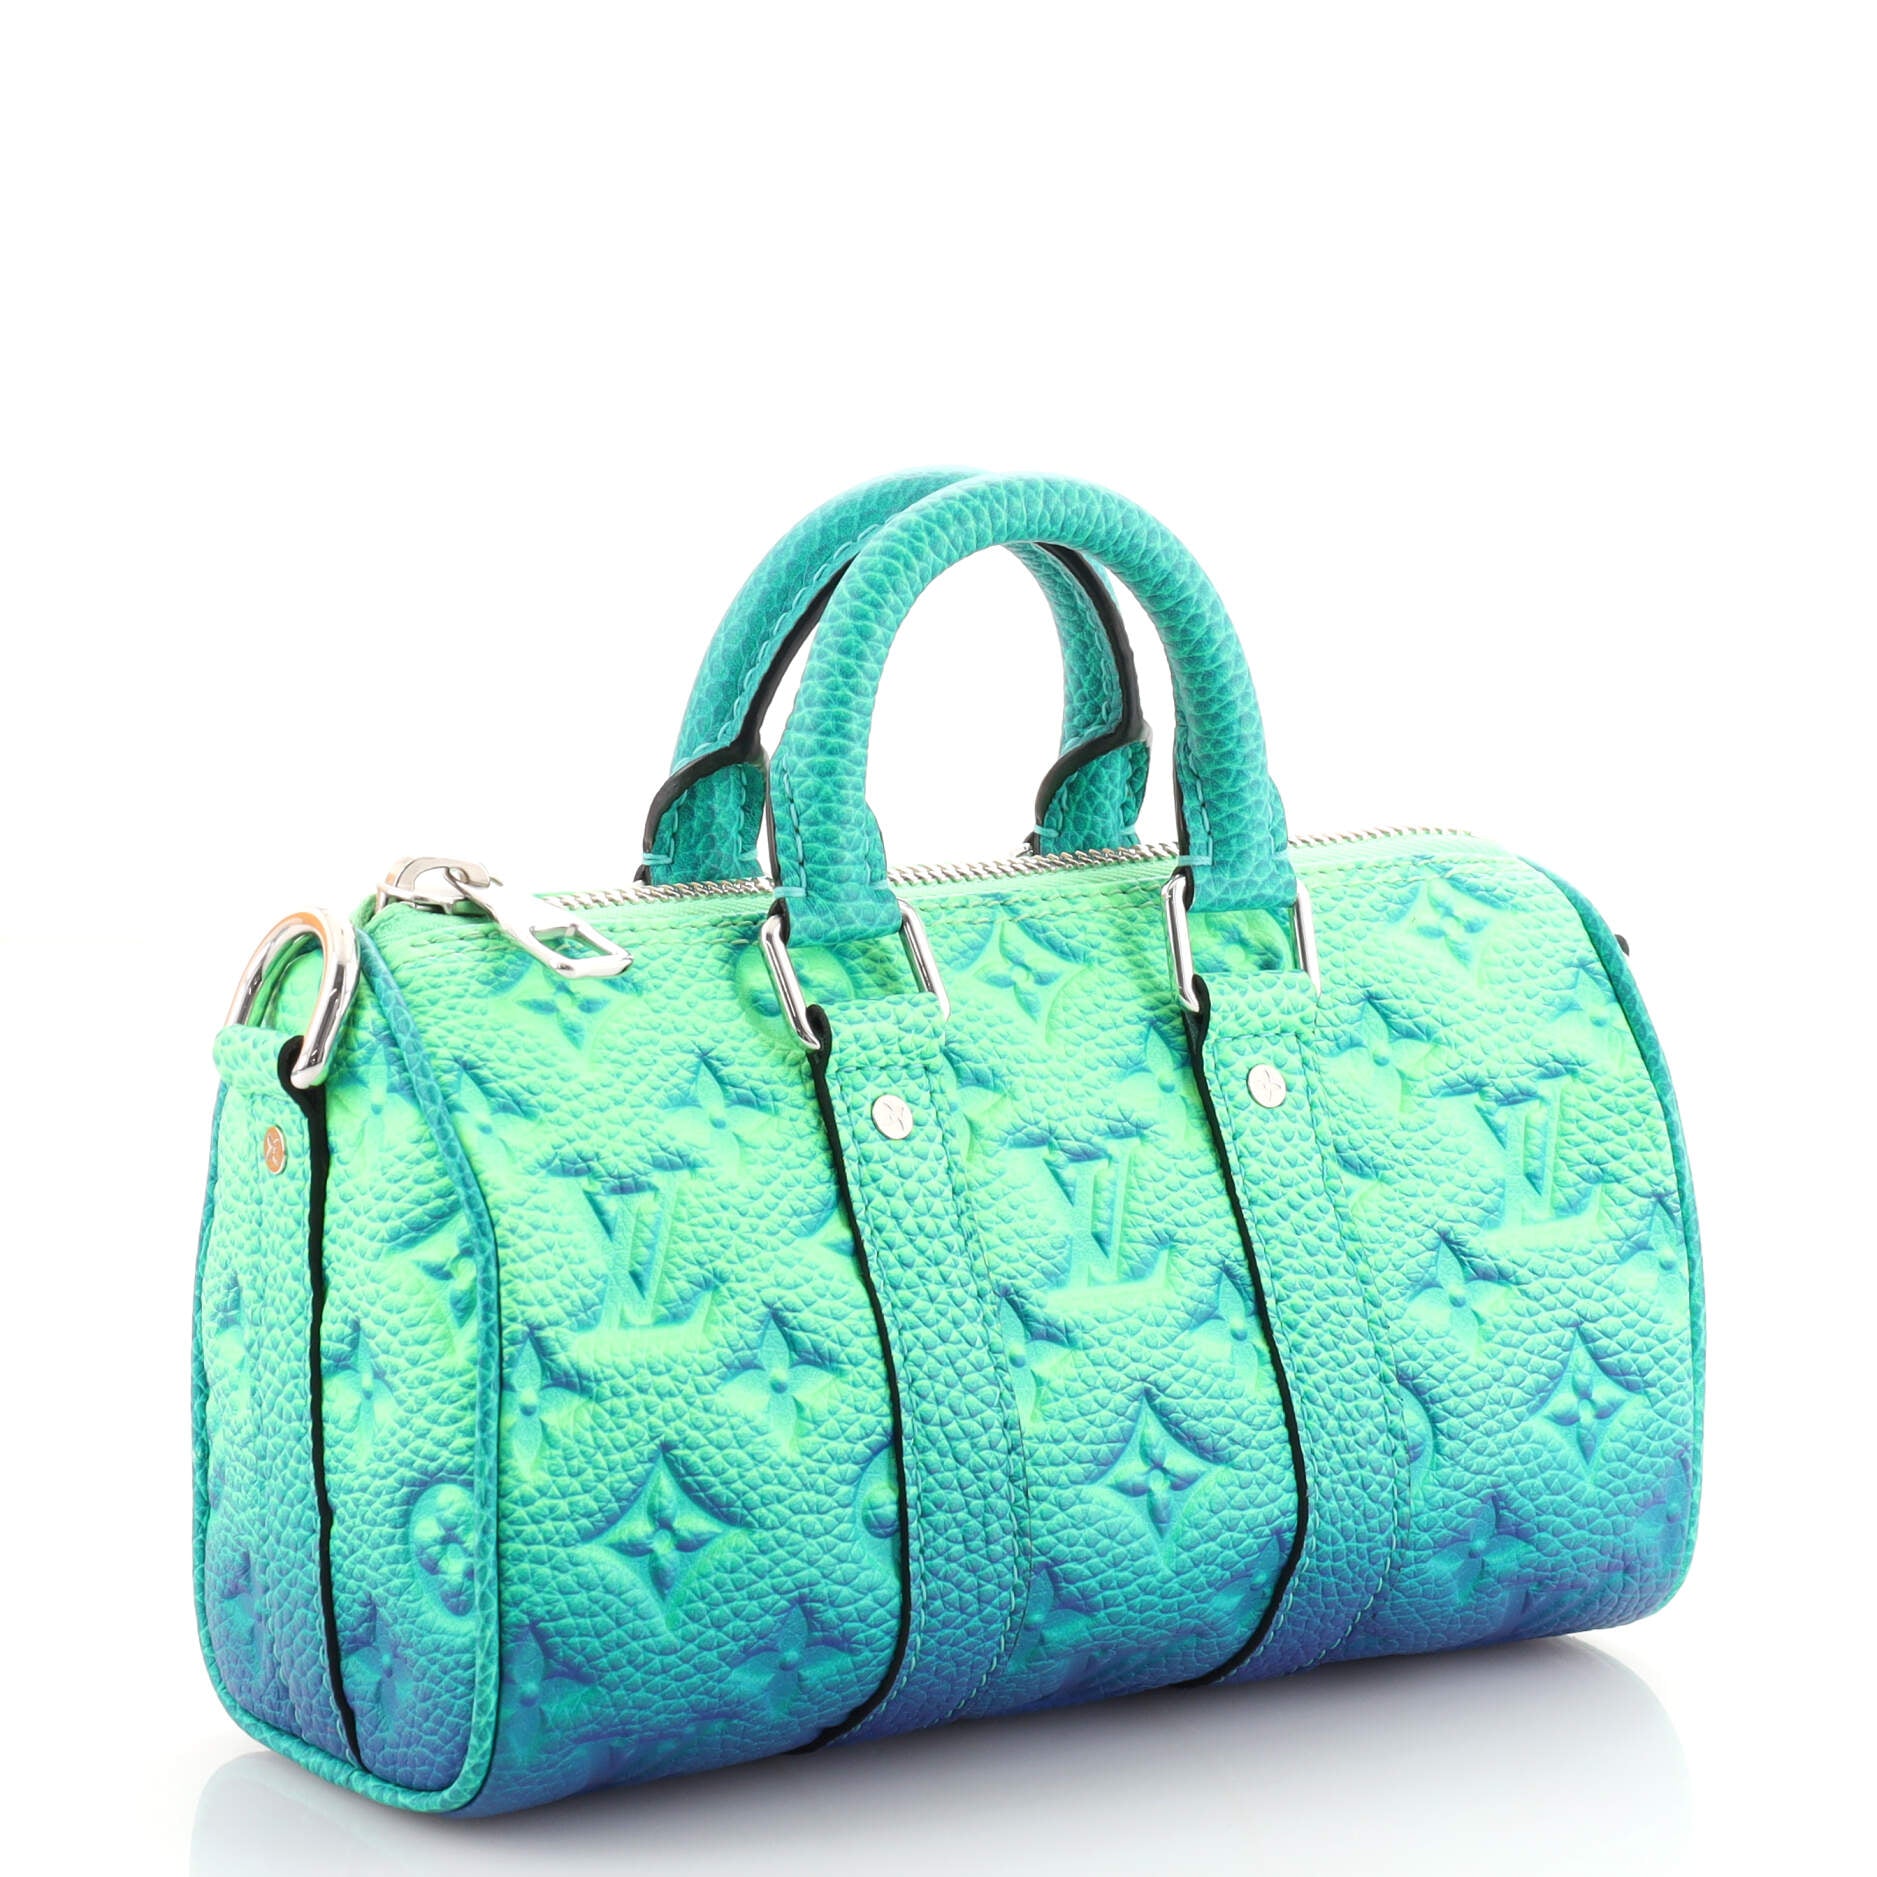 Louis Vuitton Keepall Bandouliere Bag Limited Edition Illusion Monogram